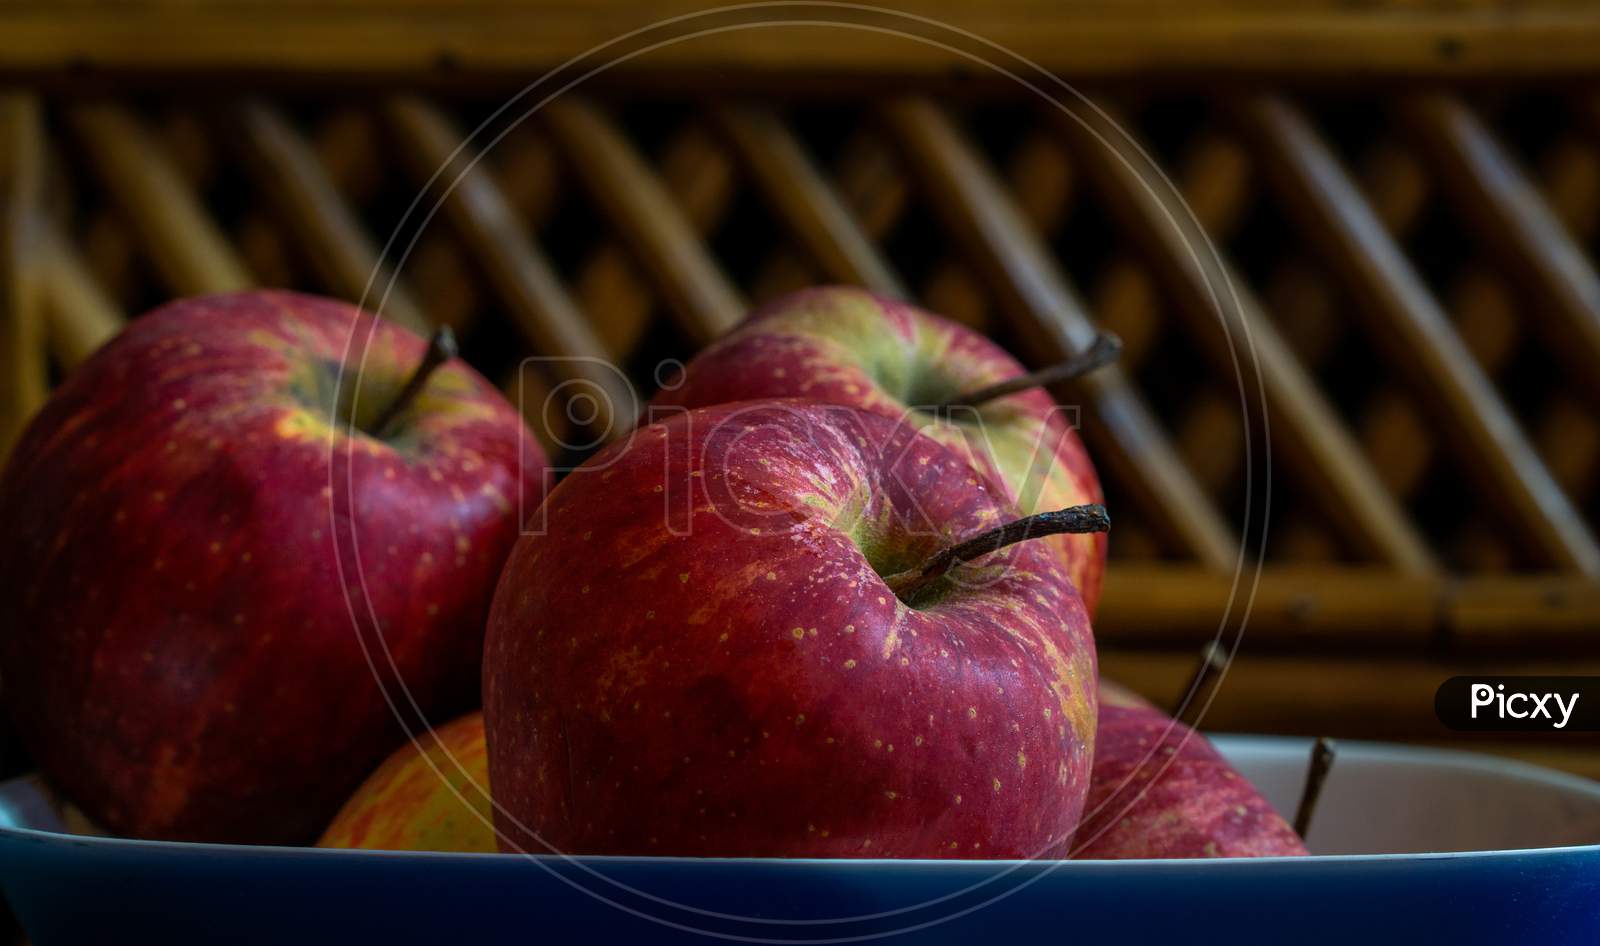 A Bunch Of Healthy Apples Stacked Together In A Bowl